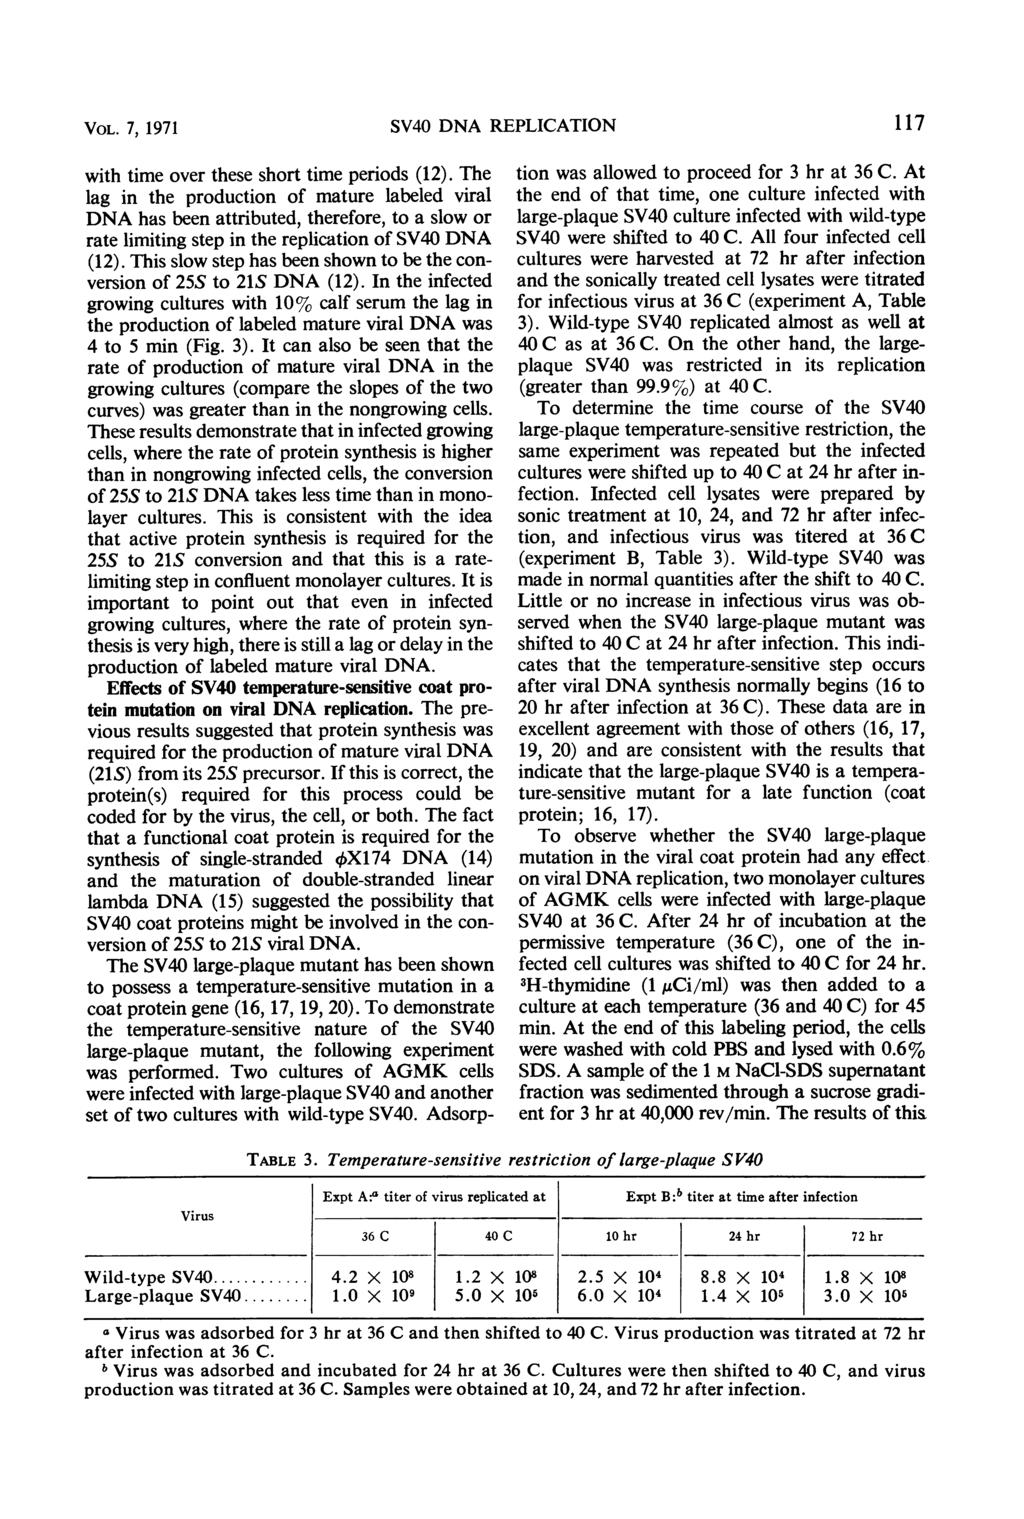 VOL. 7, 1971 SV40 DNA REPLICATION 117 with time over these short time periods (12).